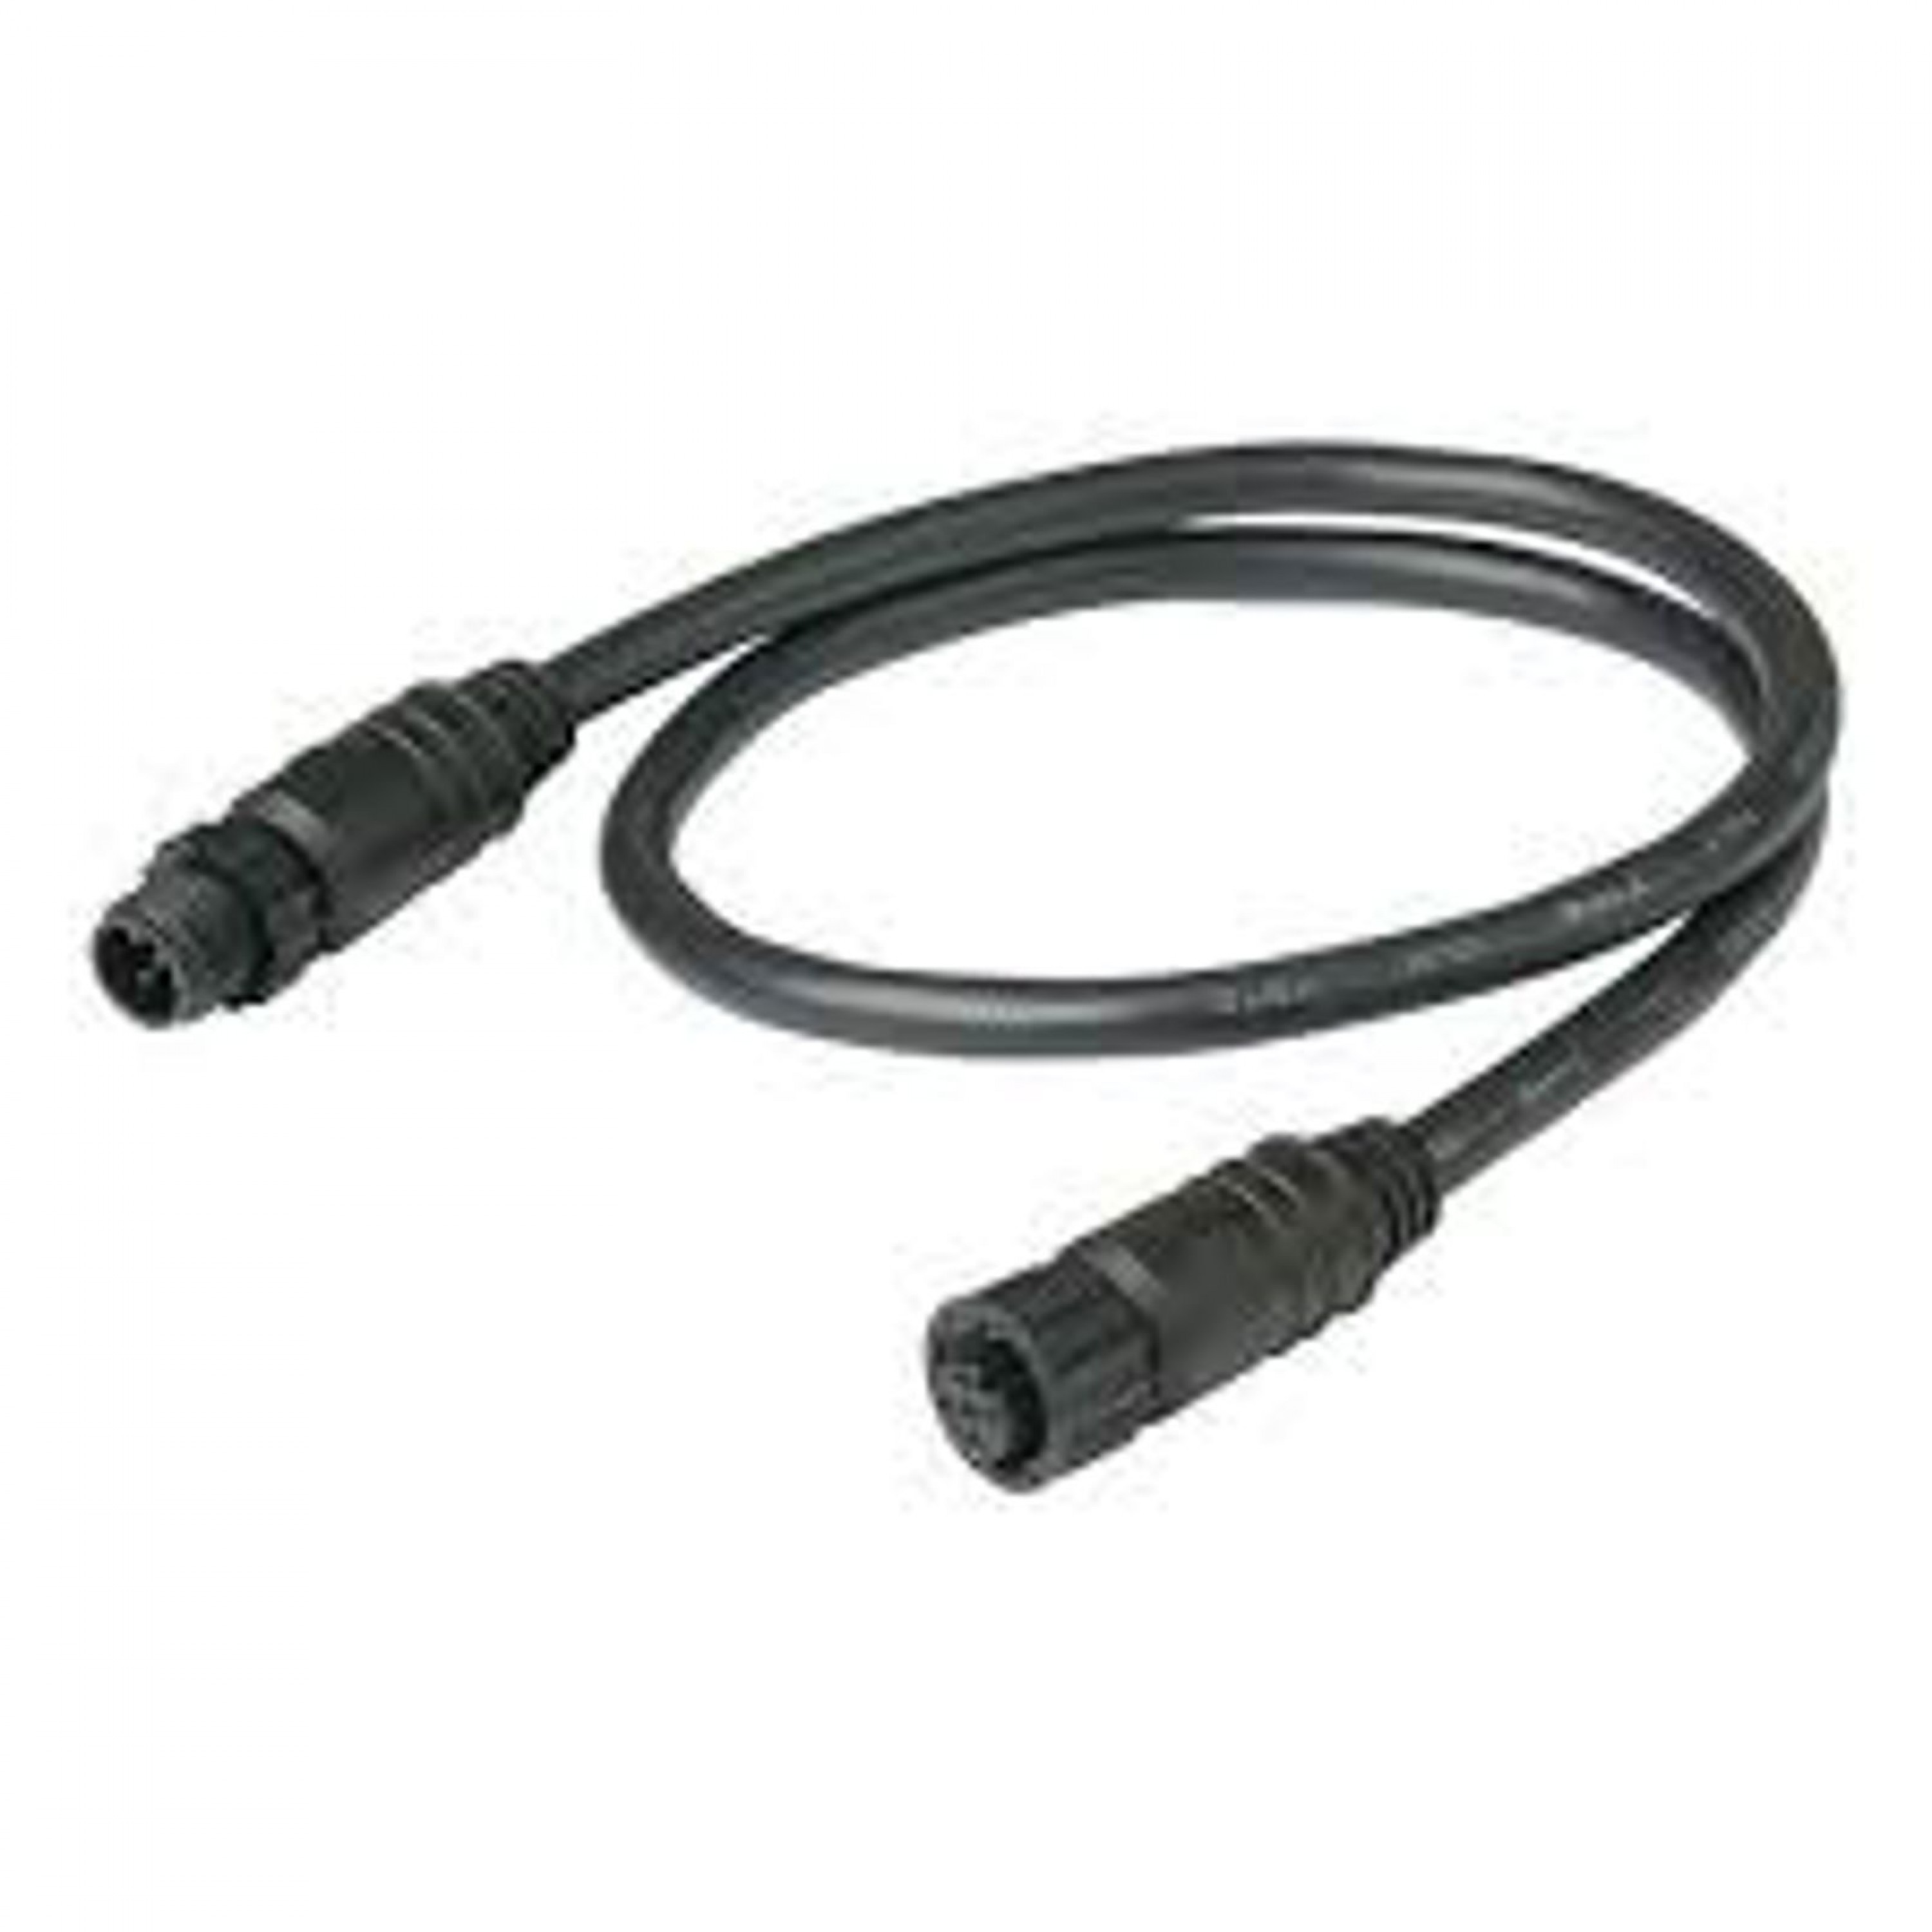 ANCOR DROP CABLE .5 METER (1.6 FT) UNIVERSAL FIT